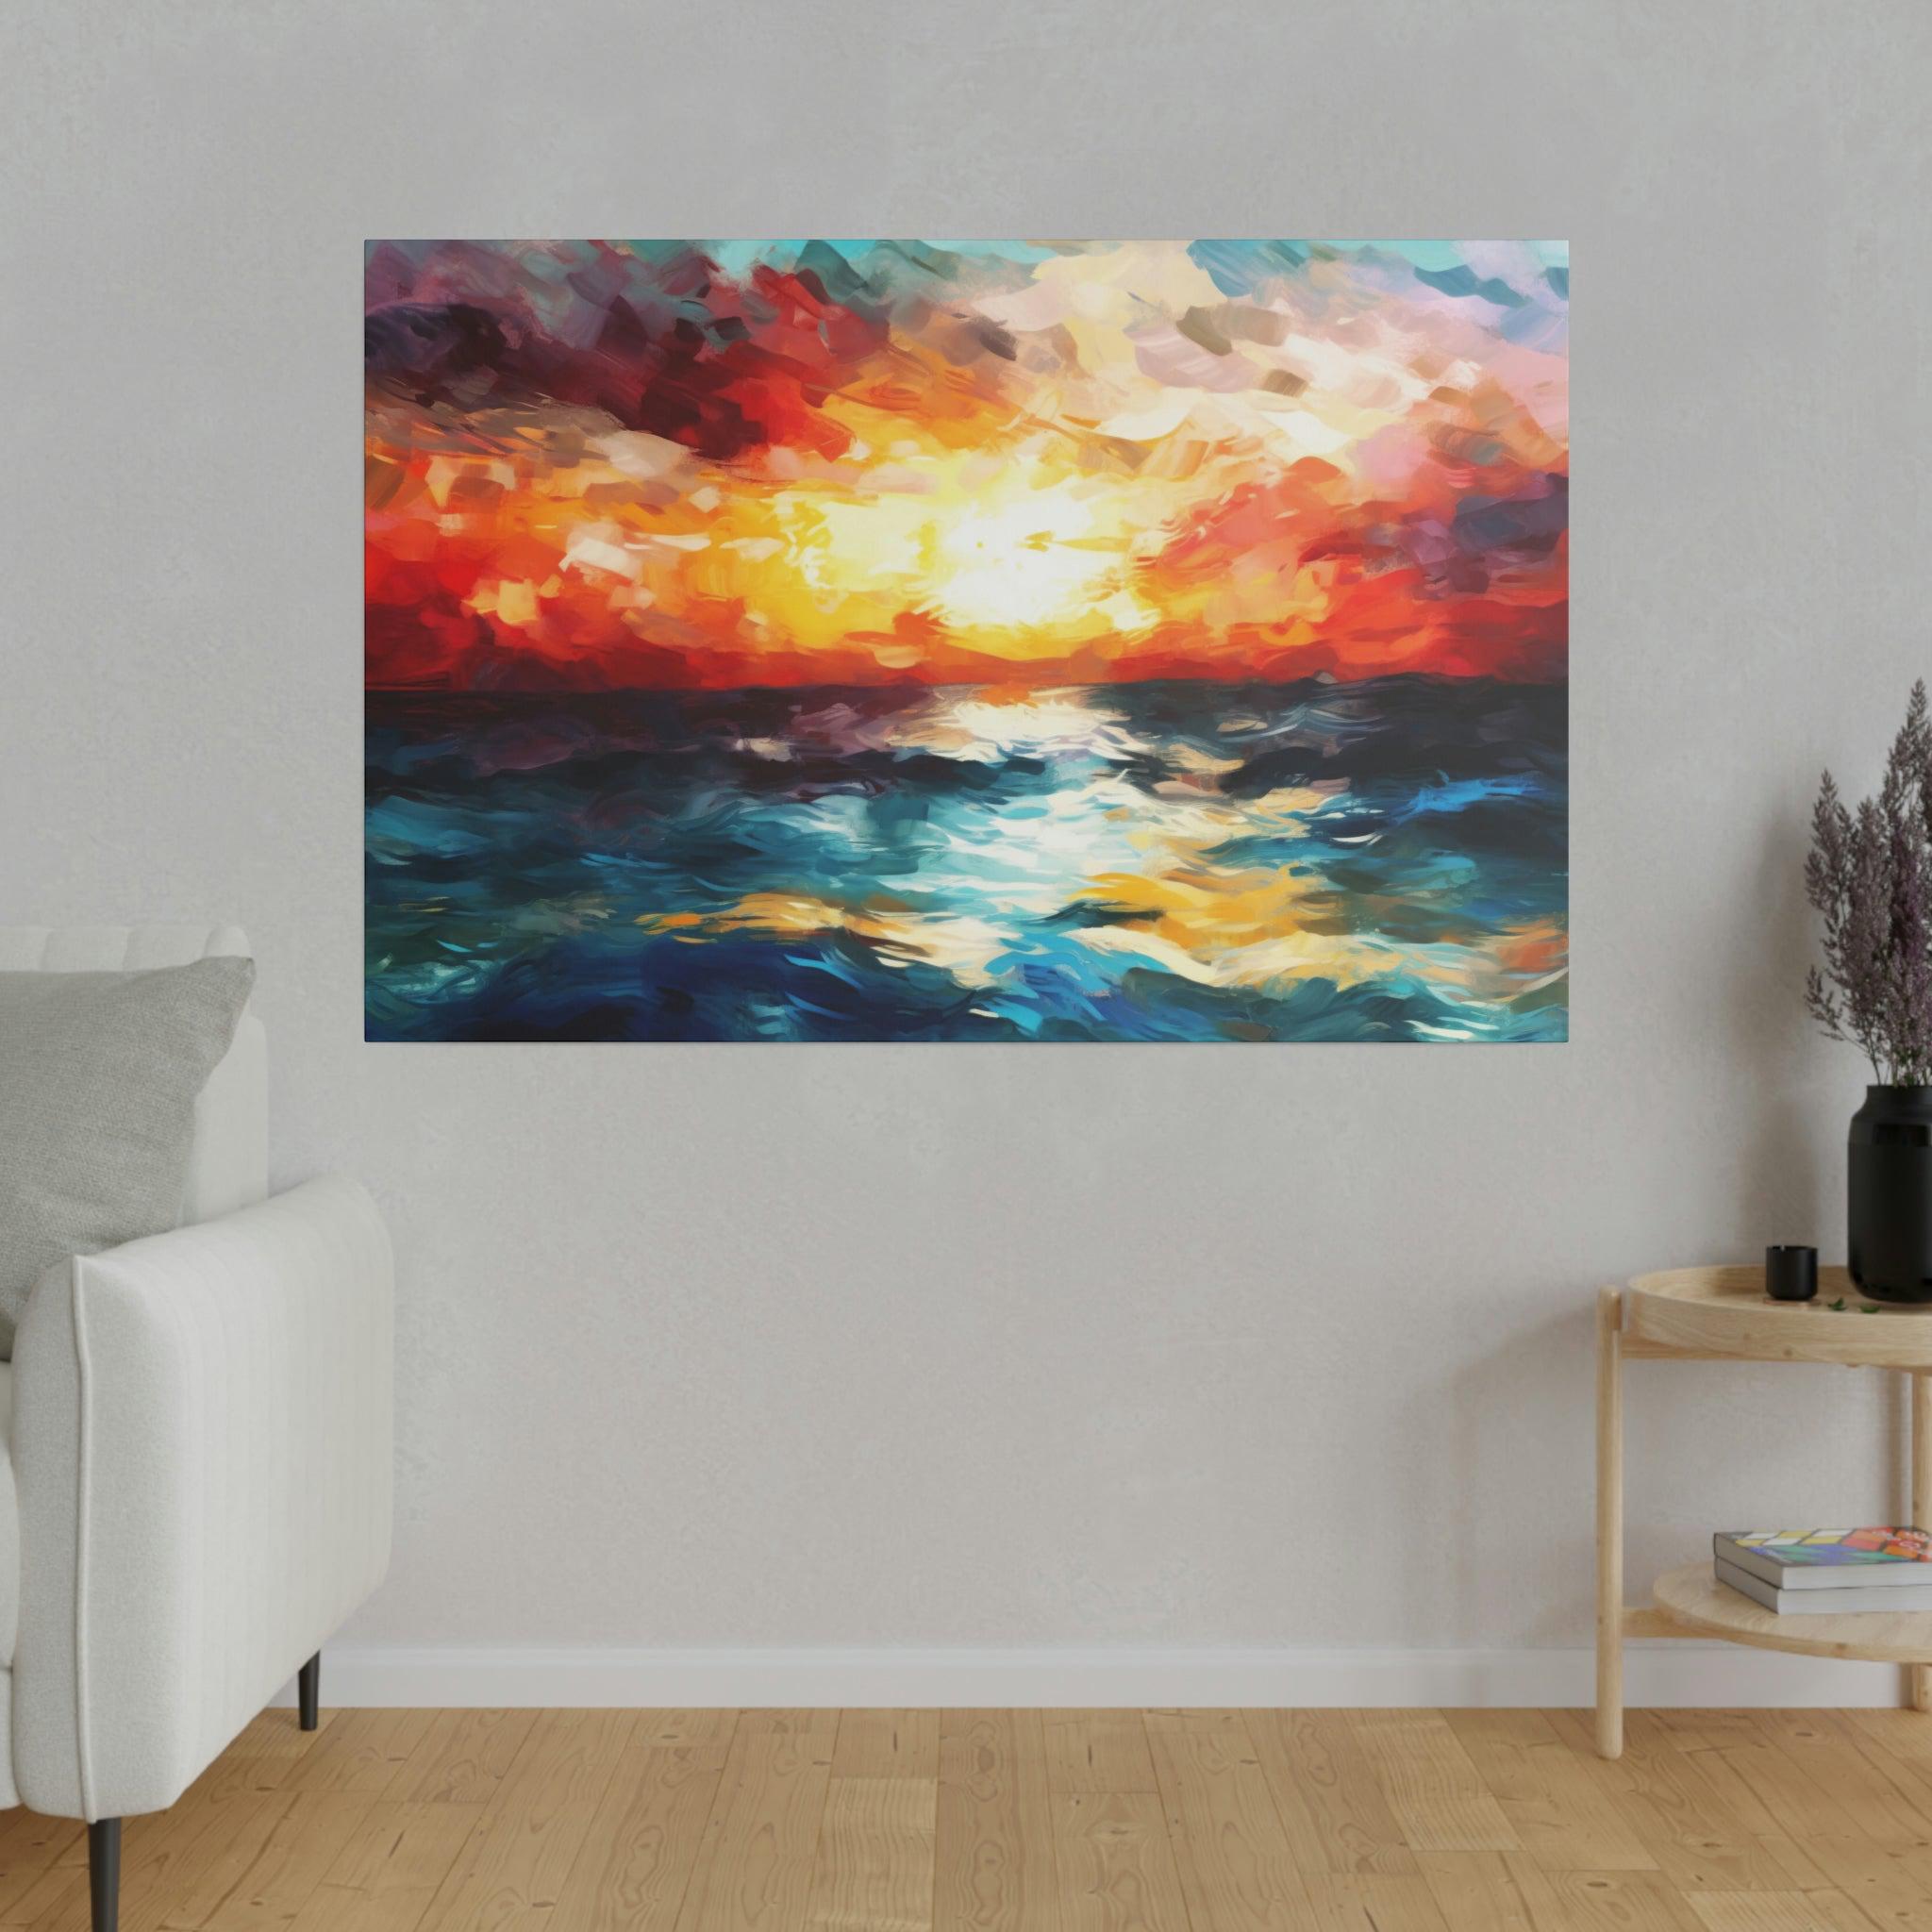 Ocean Sunset Wall Art - Abstract Picture Canvas Print Wall Painting Modern Artwork Wall Art for Living Room Home Office Décor